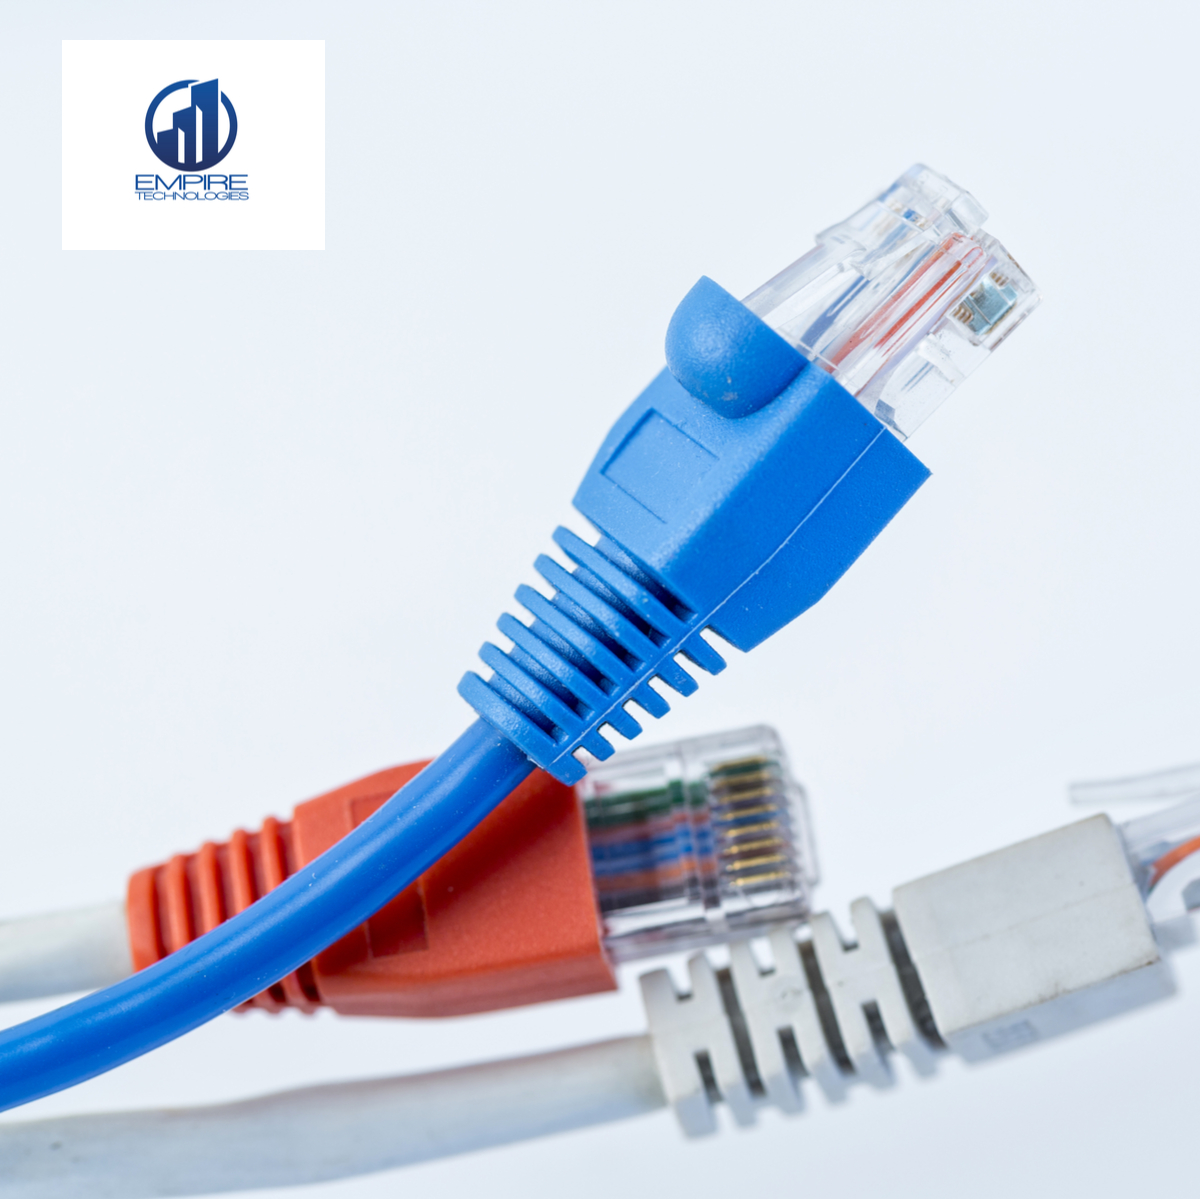 What are the Differences Between Cat 5, Cat 6, Cat 7, and Cat 8 Cabling Systems for Businesses?